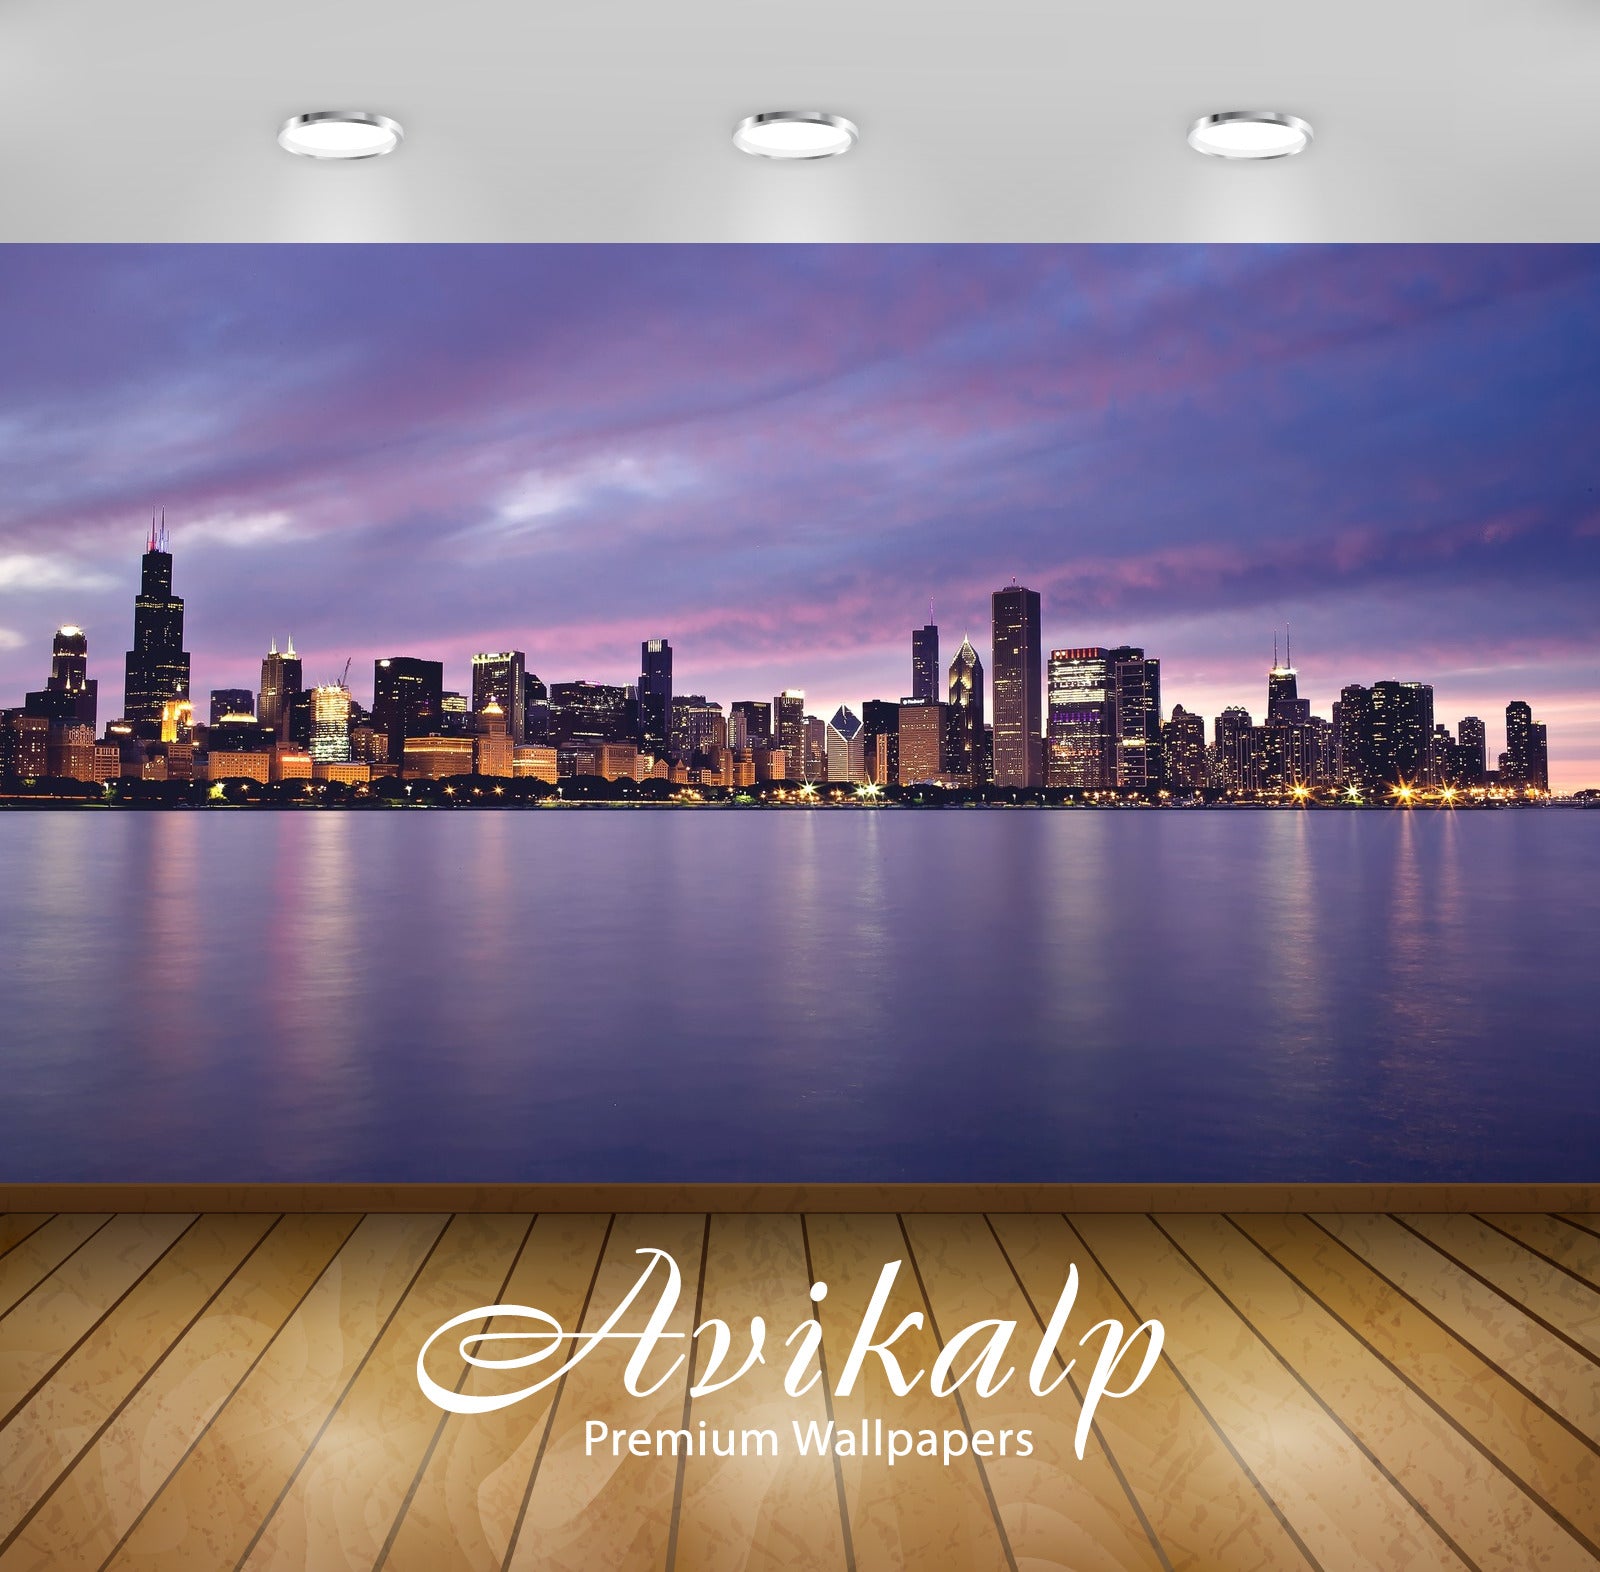 Avikalp Exclusive Awi1886  City Of Chicago Full HD Wallpapers for Living room, Hall, Kids Room, Kitc